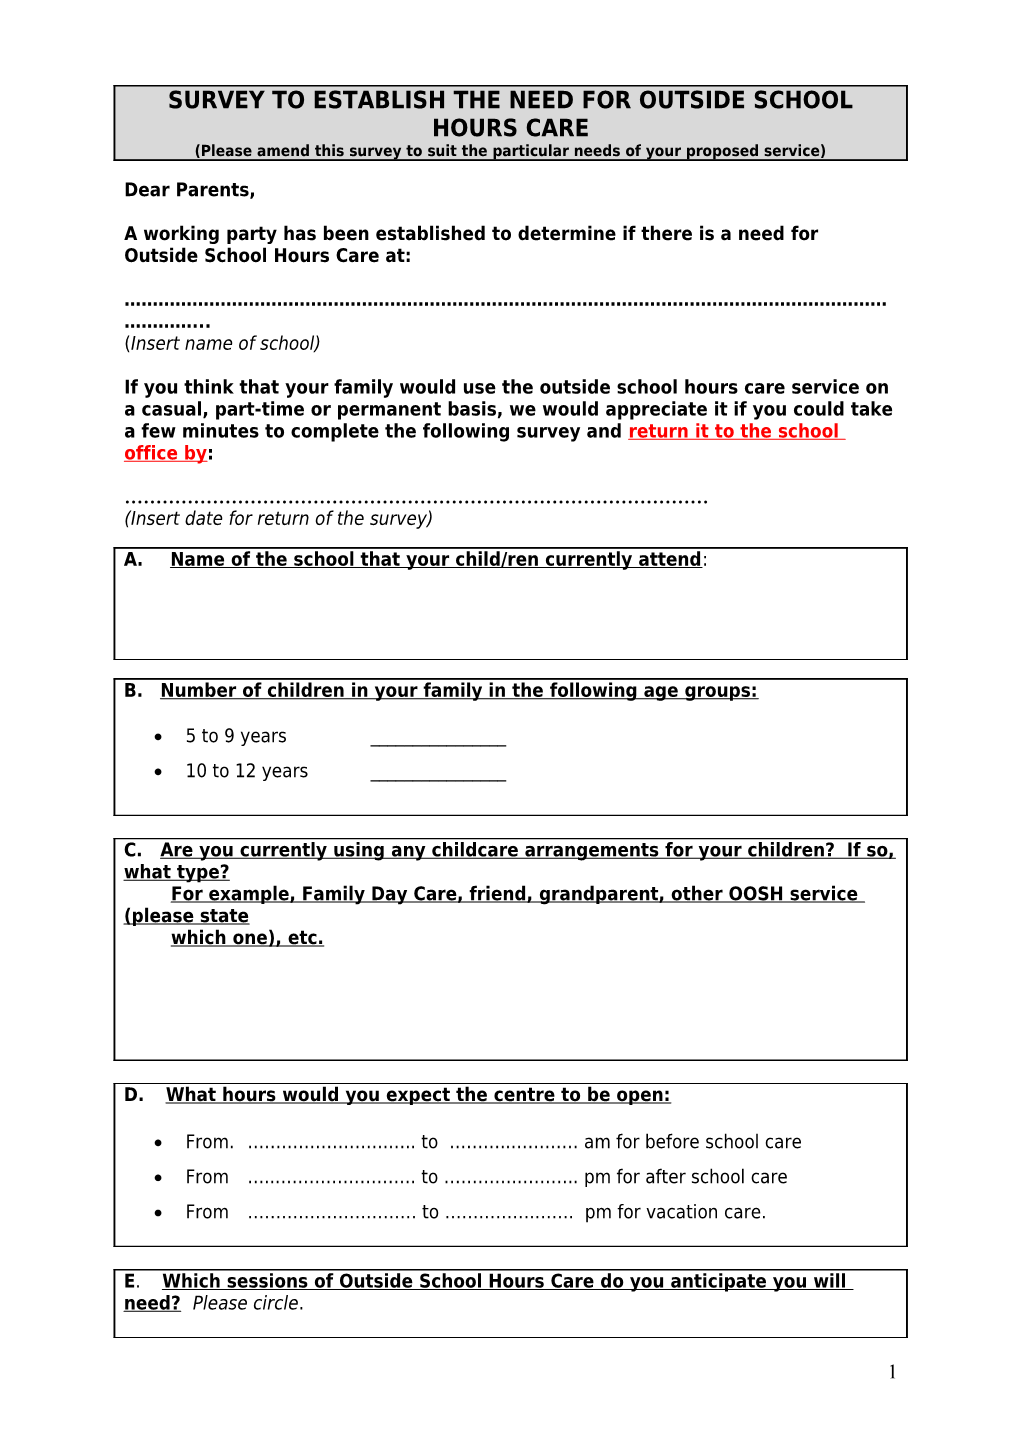 Survey to Establish the Need for Before and After School & Vacation Care